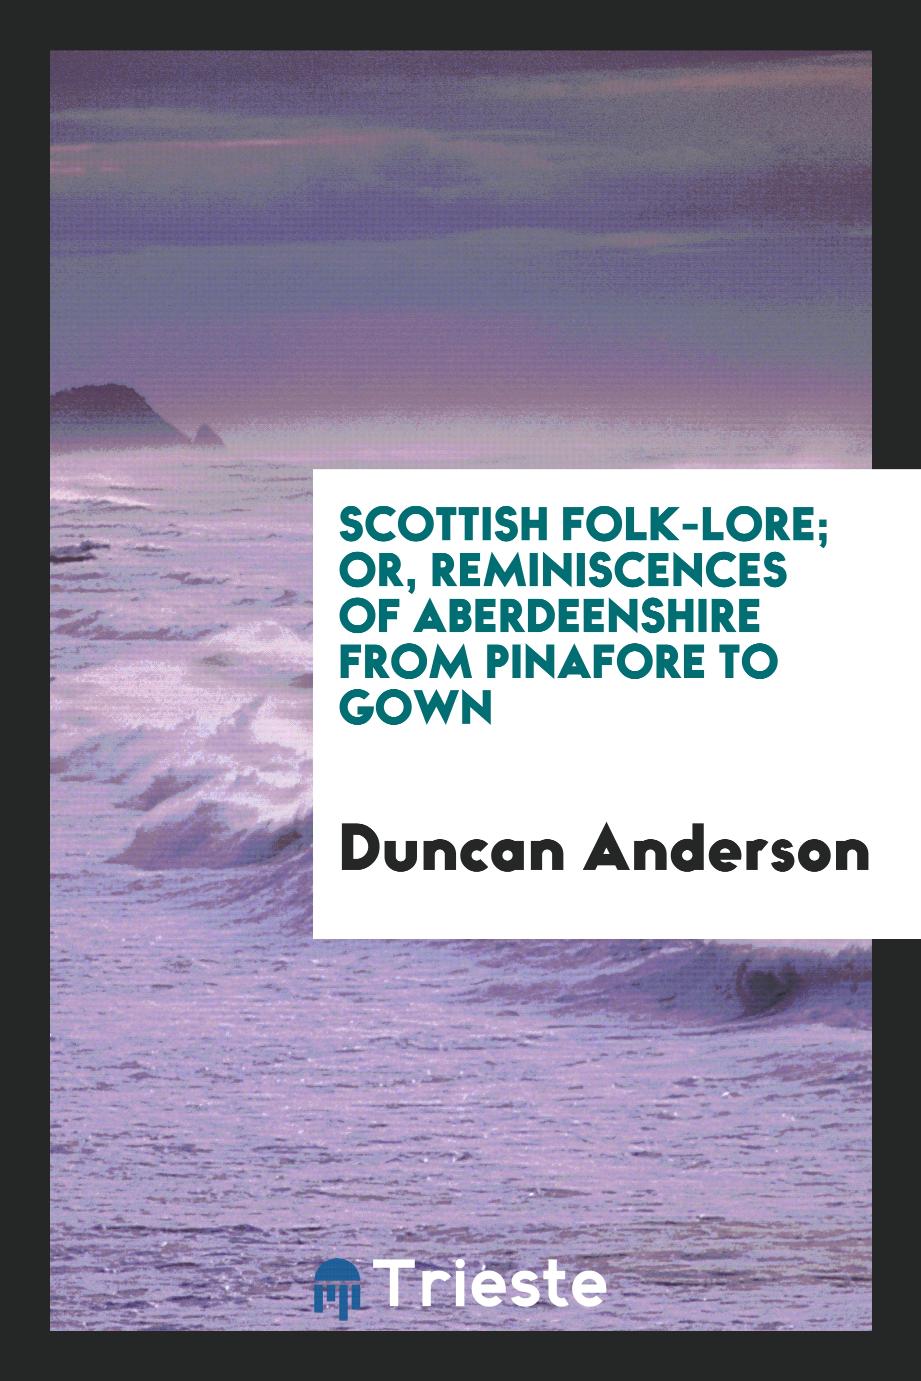 Scottish folk-lore; or, Reminiscences of Aberdeenshire from pinafore to gown